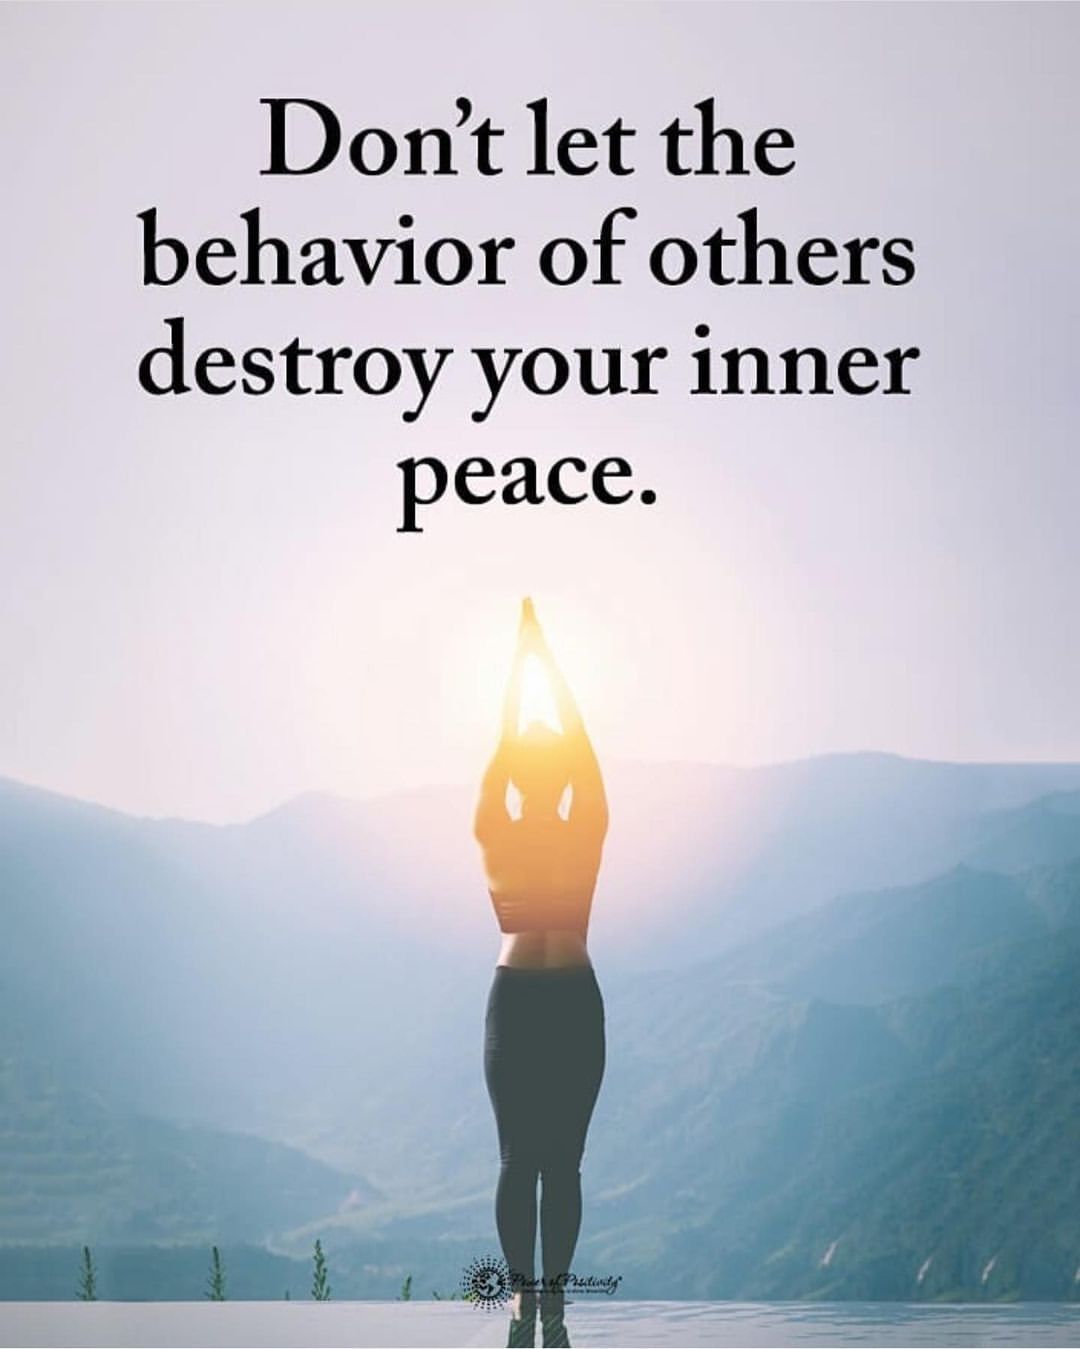 Don't let the behavior of others destroy your inner peace. Dalai Lama.